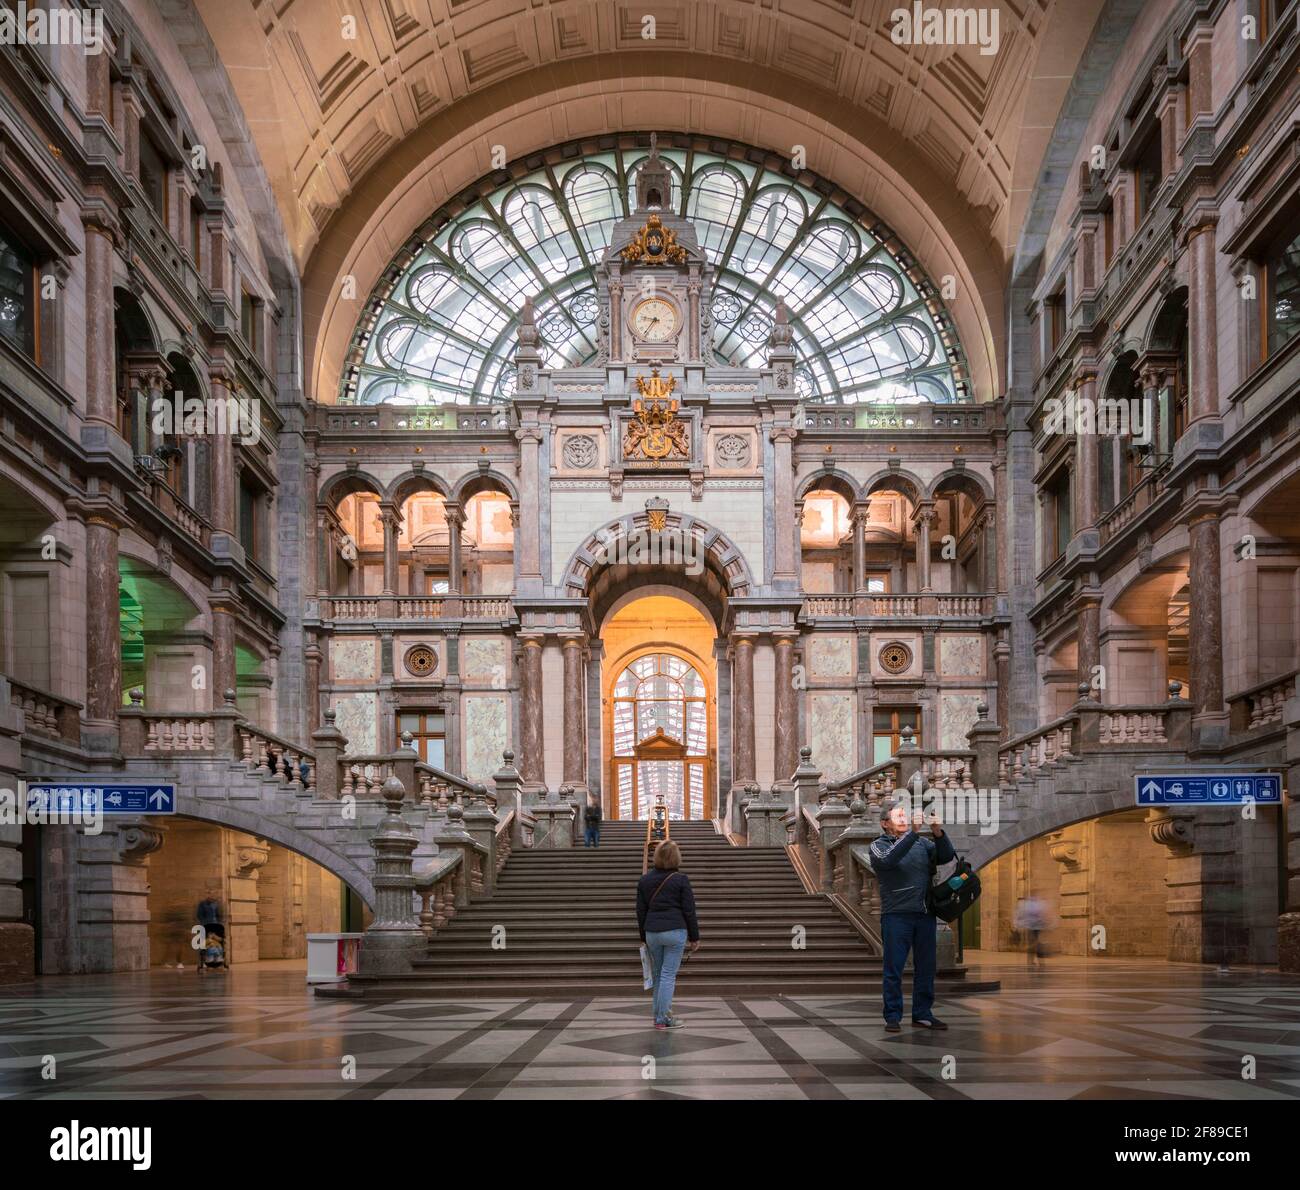 Antwerp, Belgium - 04.29.2018: Inside the old part of Antwerpen-Centraal train station. Old urban industrialarchitecture with lot of symmetries. Stock Photo